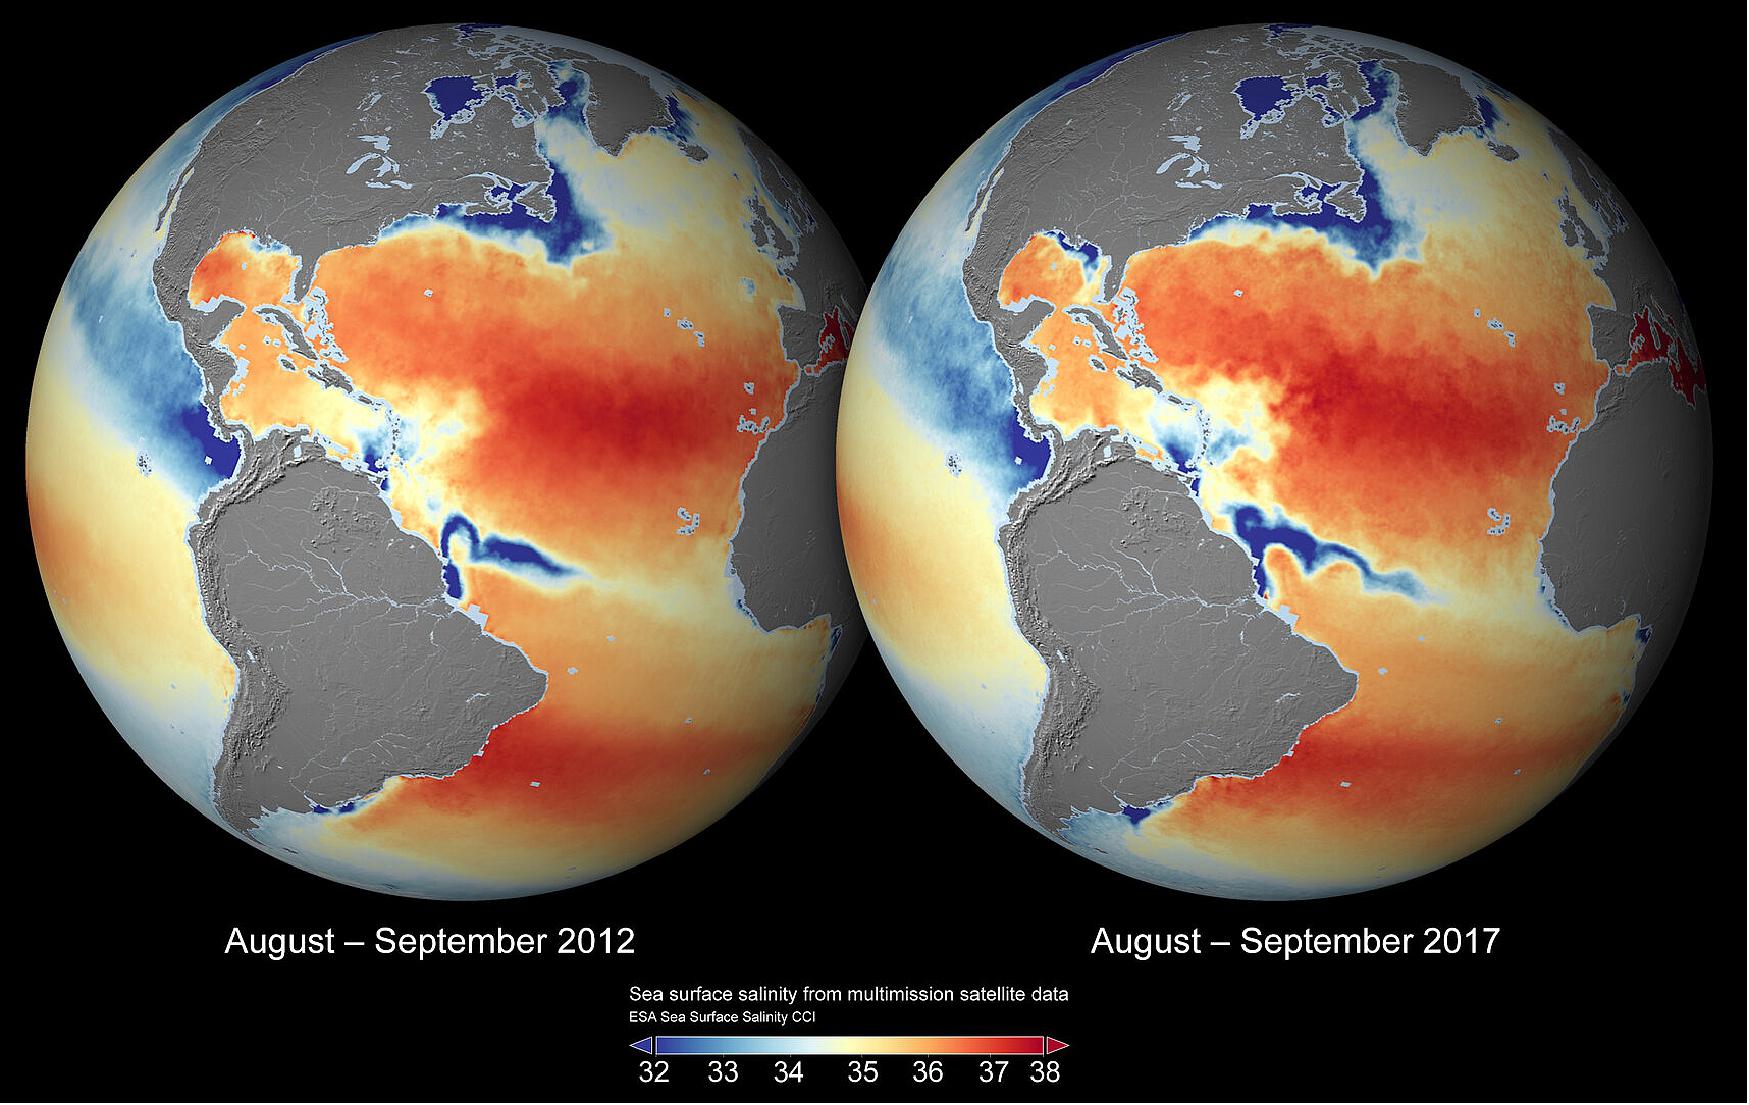 Figure 15: Global sea-surface salinity maps from ESA’s Climate Change Initiative showing the difference for the same period in 2012 and in 2017. Note the differences in the spreading of the Amazon and Mississippi River plumes (image credit: ESA Sea Surface Salinity CCI)